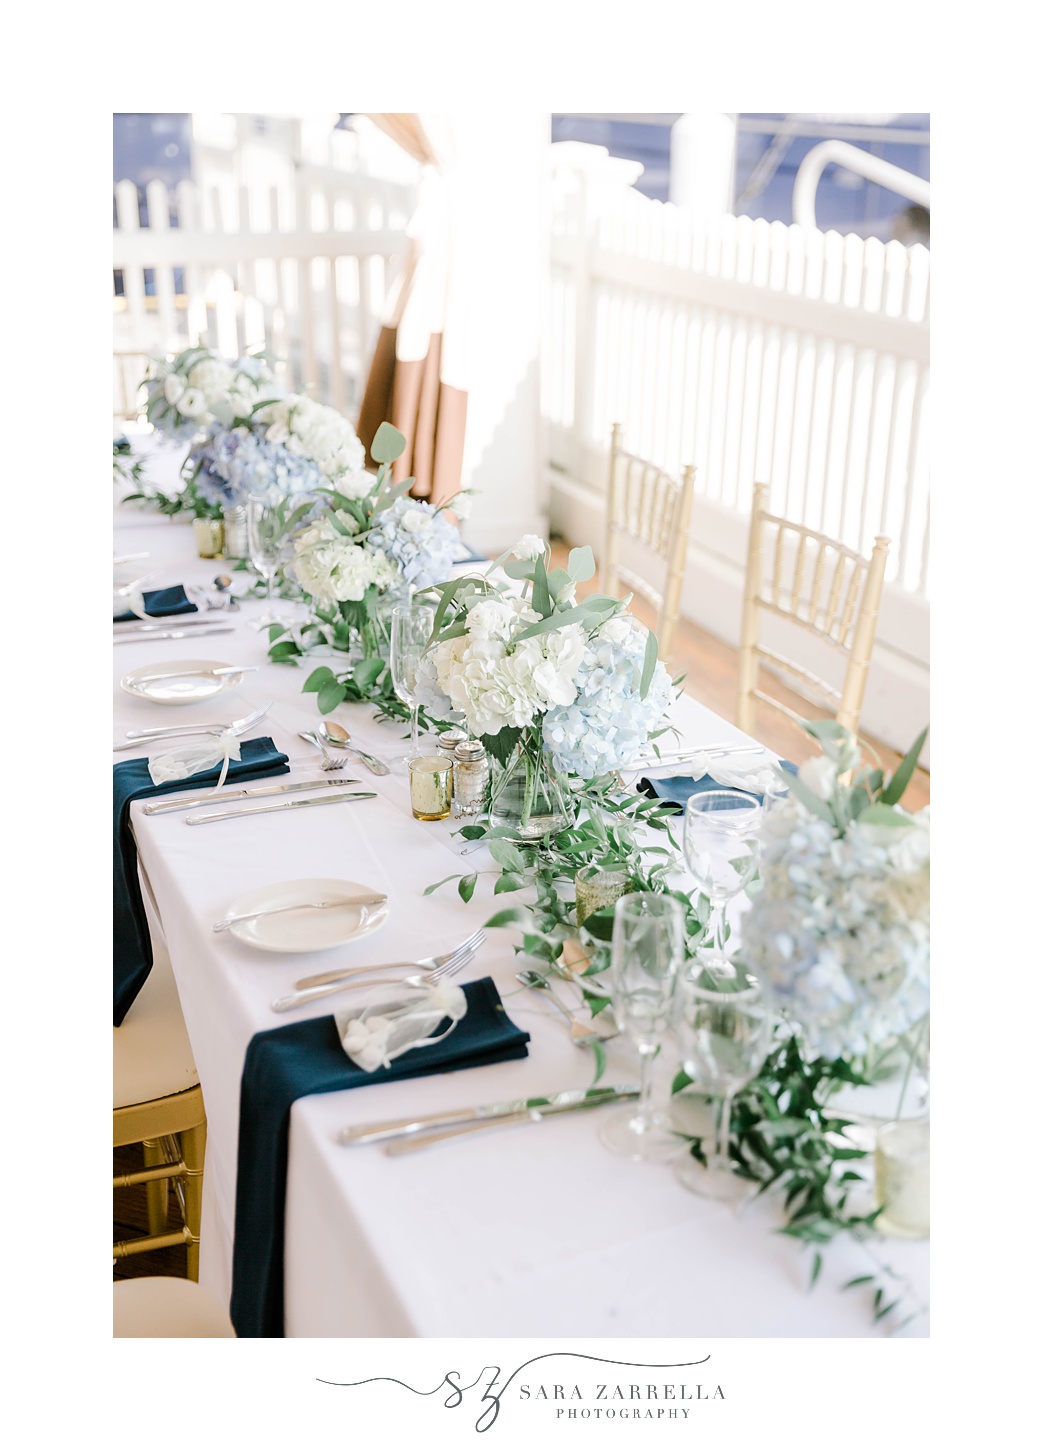 tables for reception with blue and green florals at Regatta Place